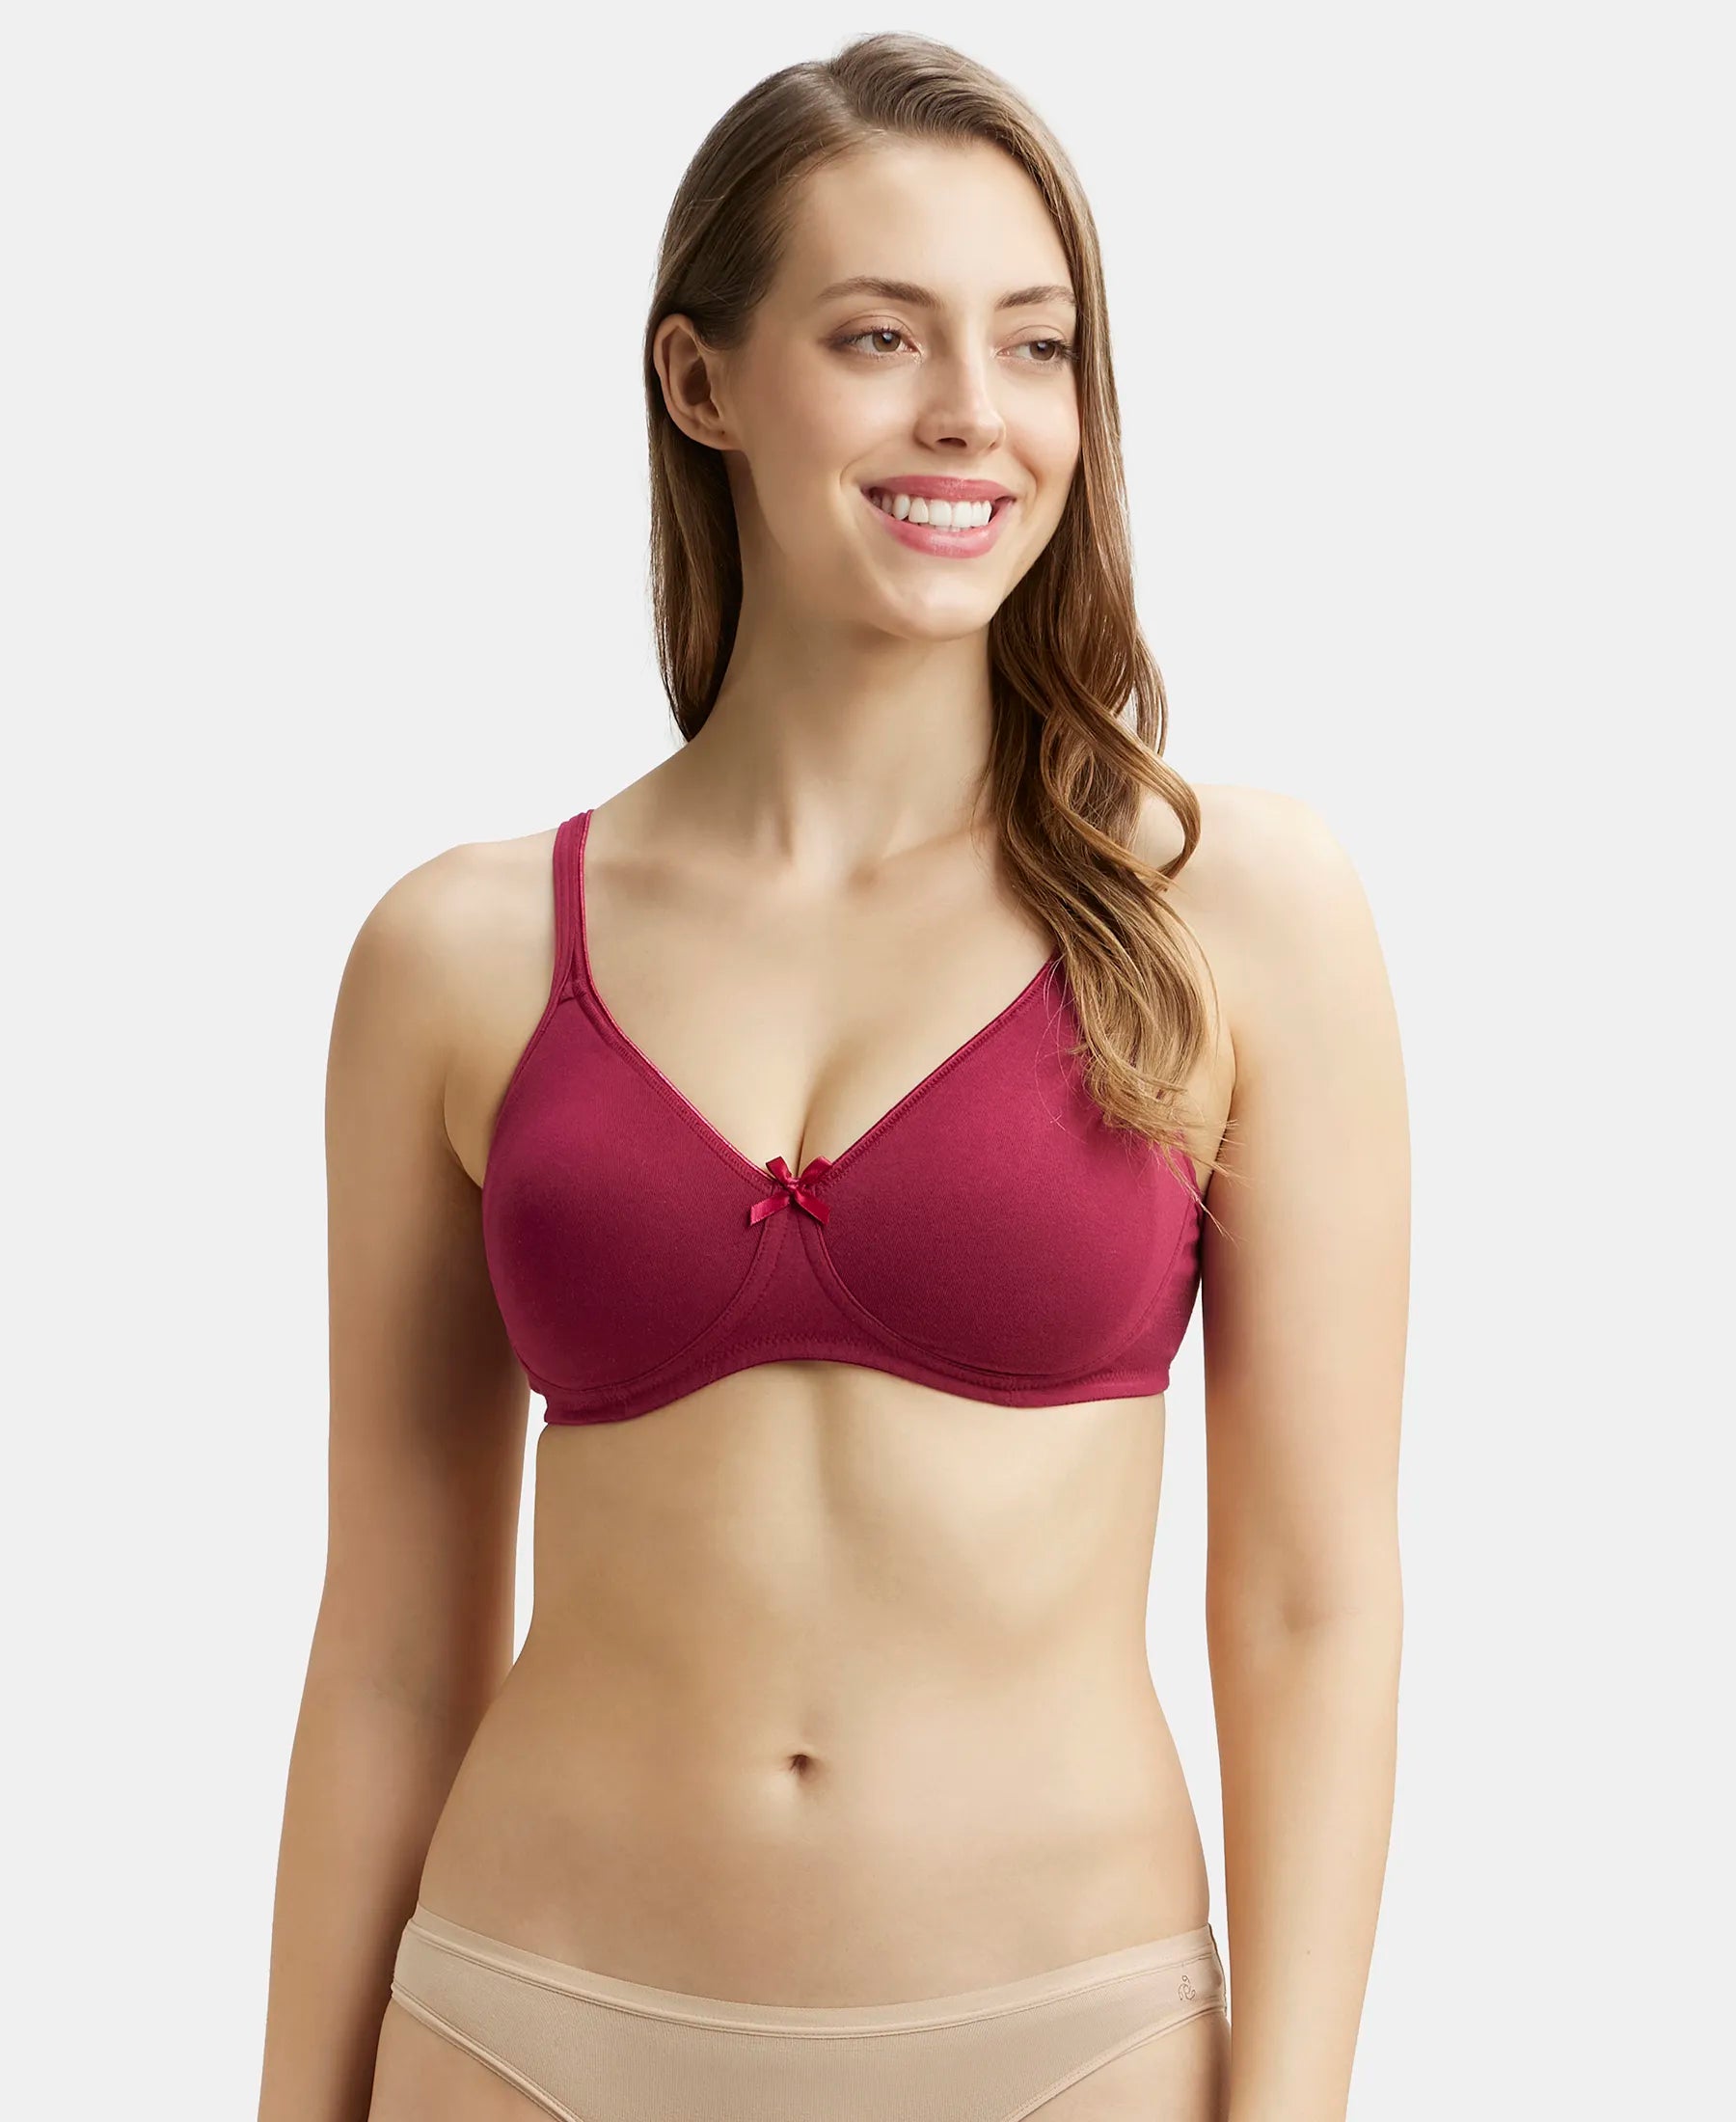 JOCKEY Beet Red Full coverage non wired T shirt Bra (34B) in Kolkata at  best price by The Attitude (Simpark Mall) - Justdial